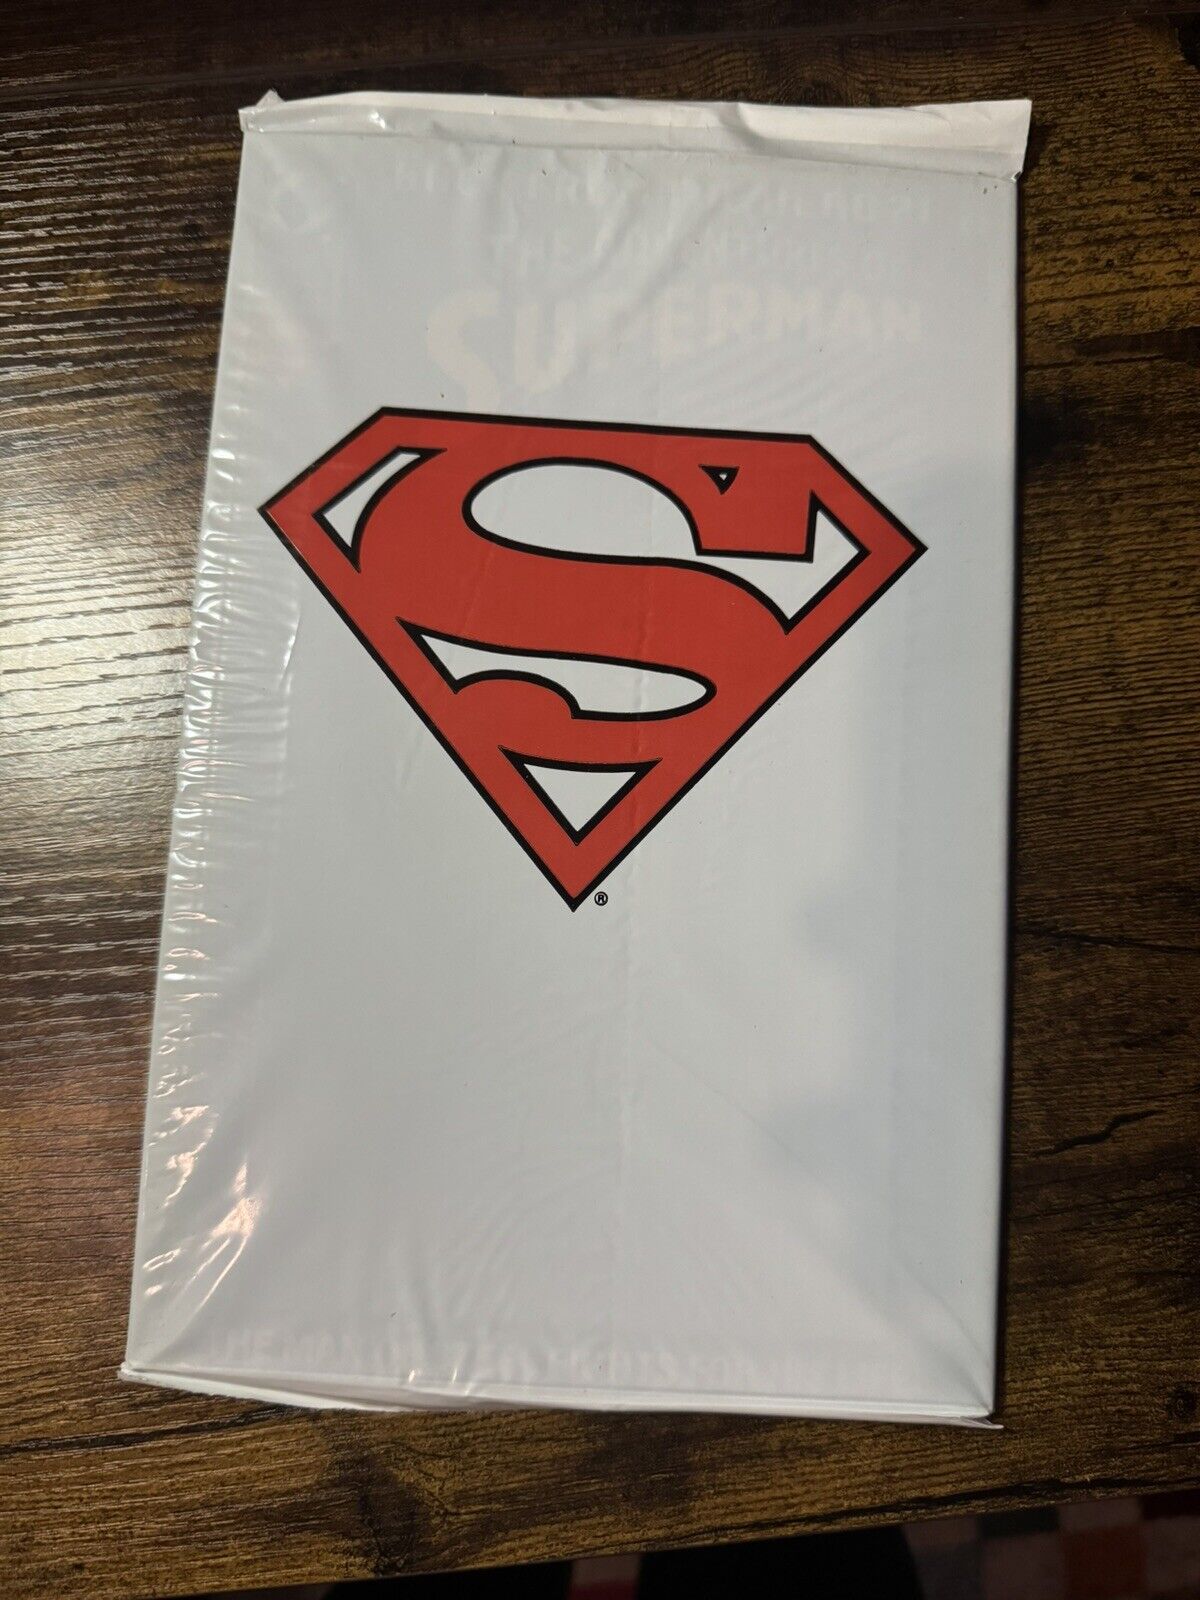 ADVENTURES OF SUPERMAN #500 - White Collector\'s Edition - SEALED Polybag - 1993